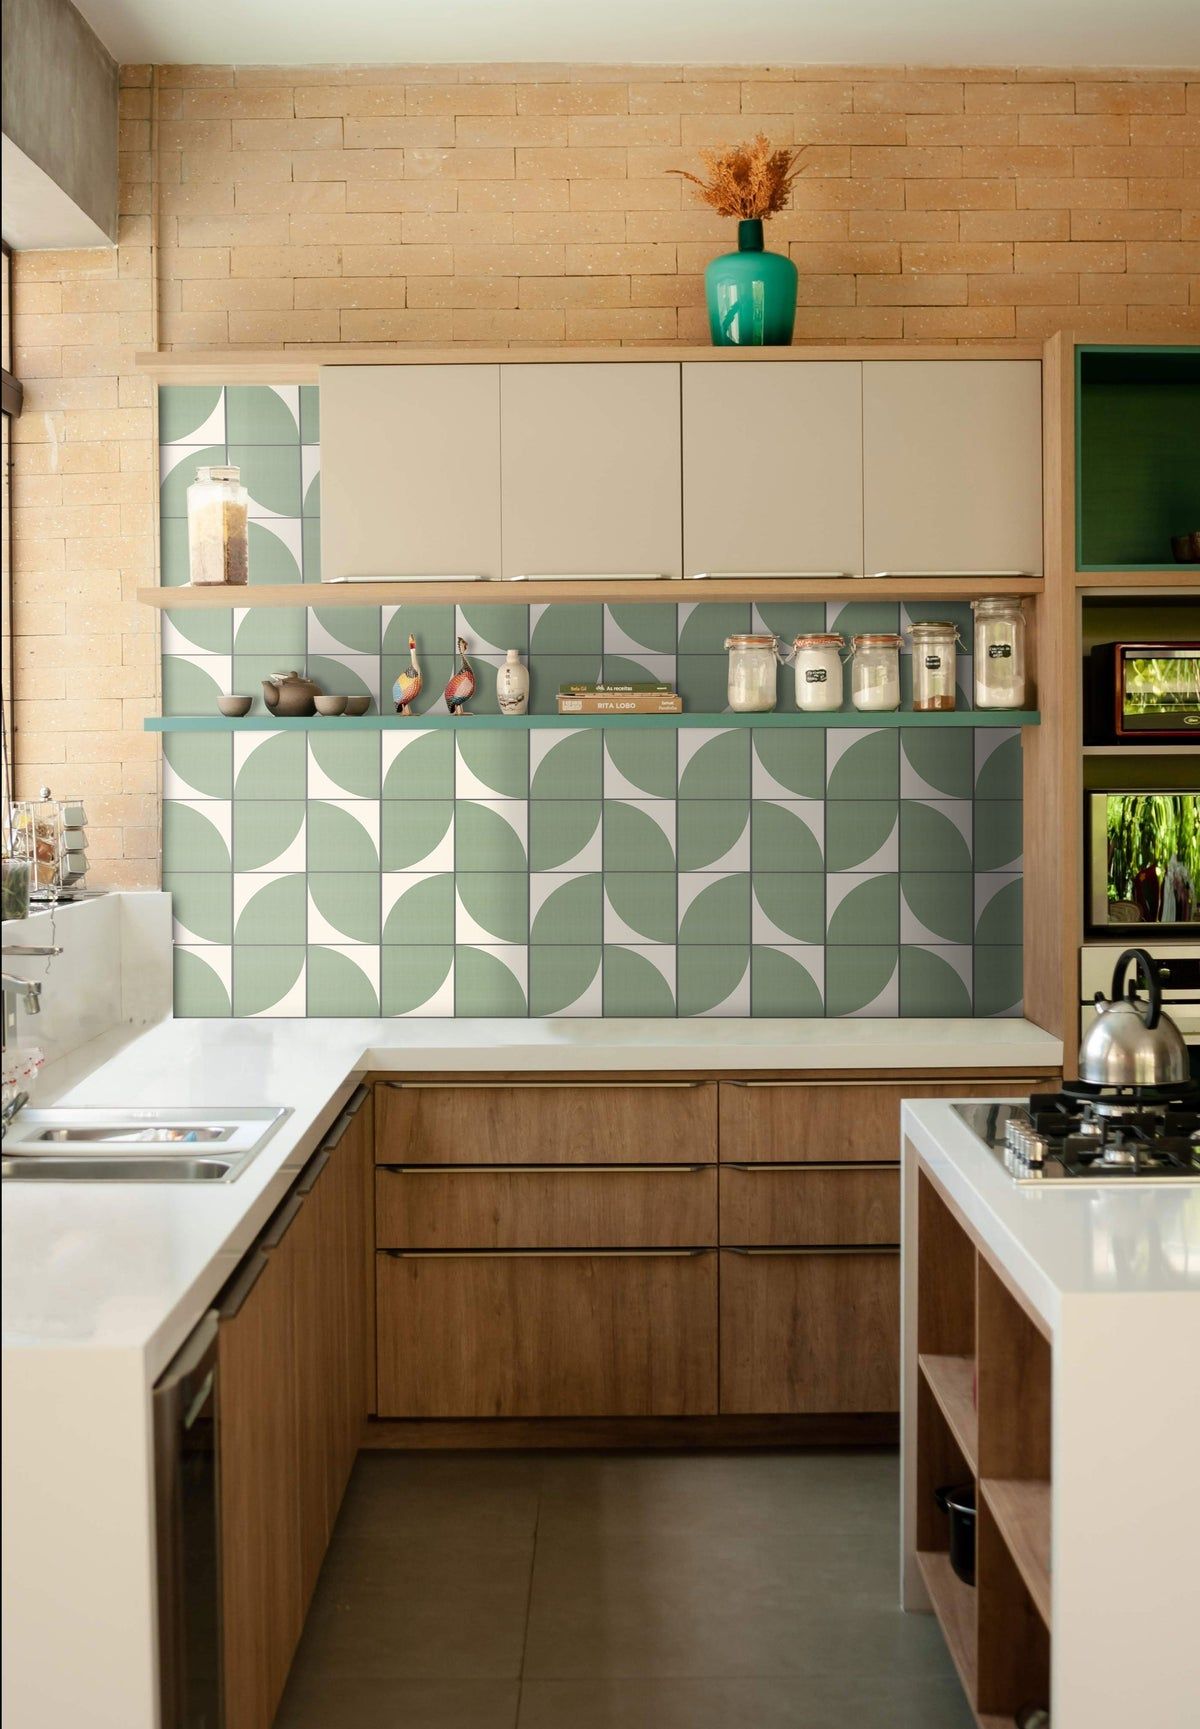 Go for the kitchen remodeling right away